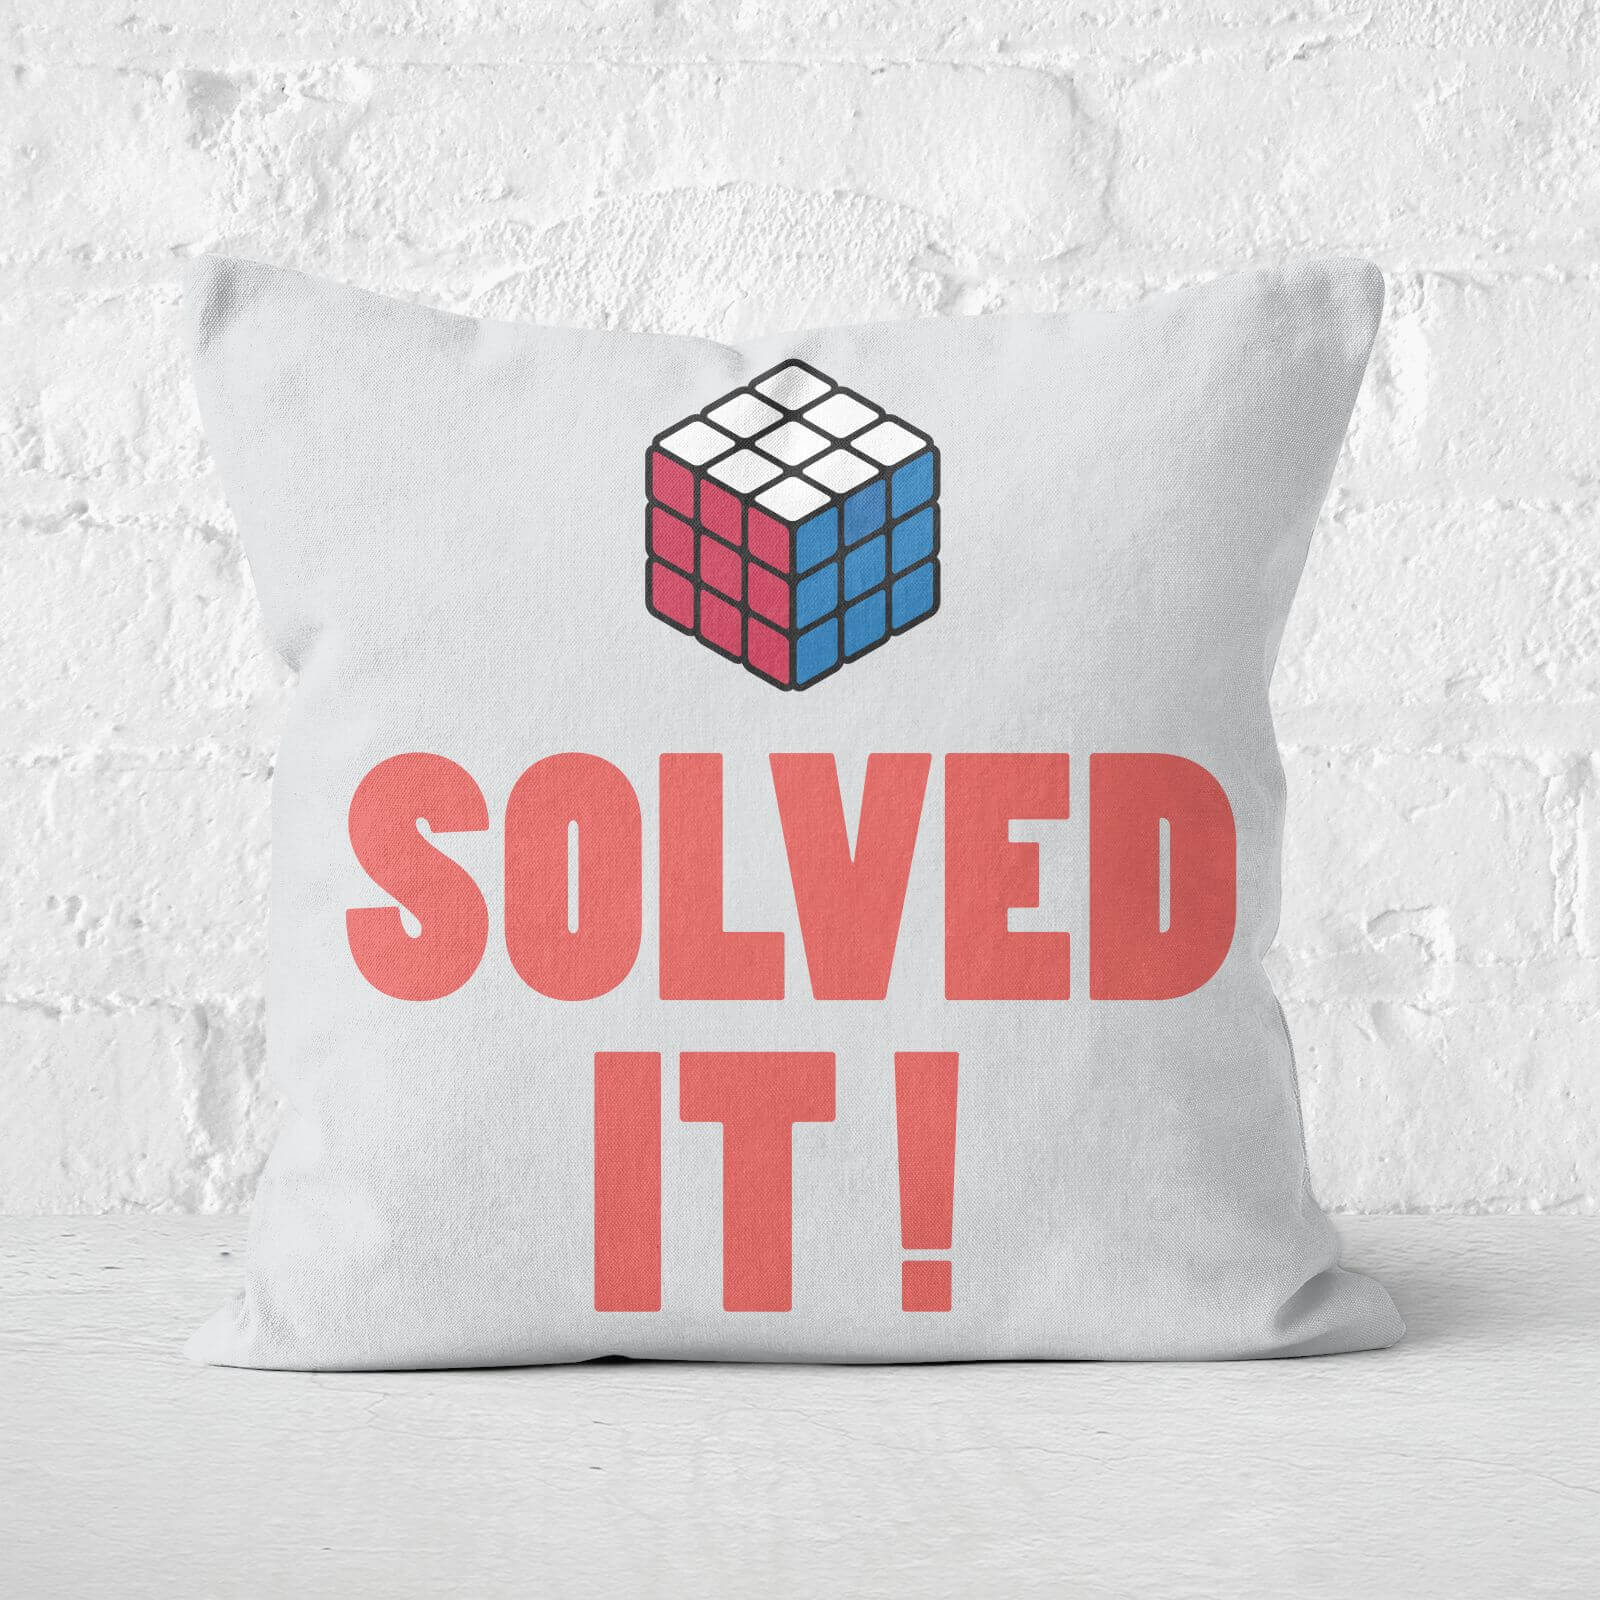 Solved It! Messed Up! Square Cushion - 50x50cm - Soft Touch